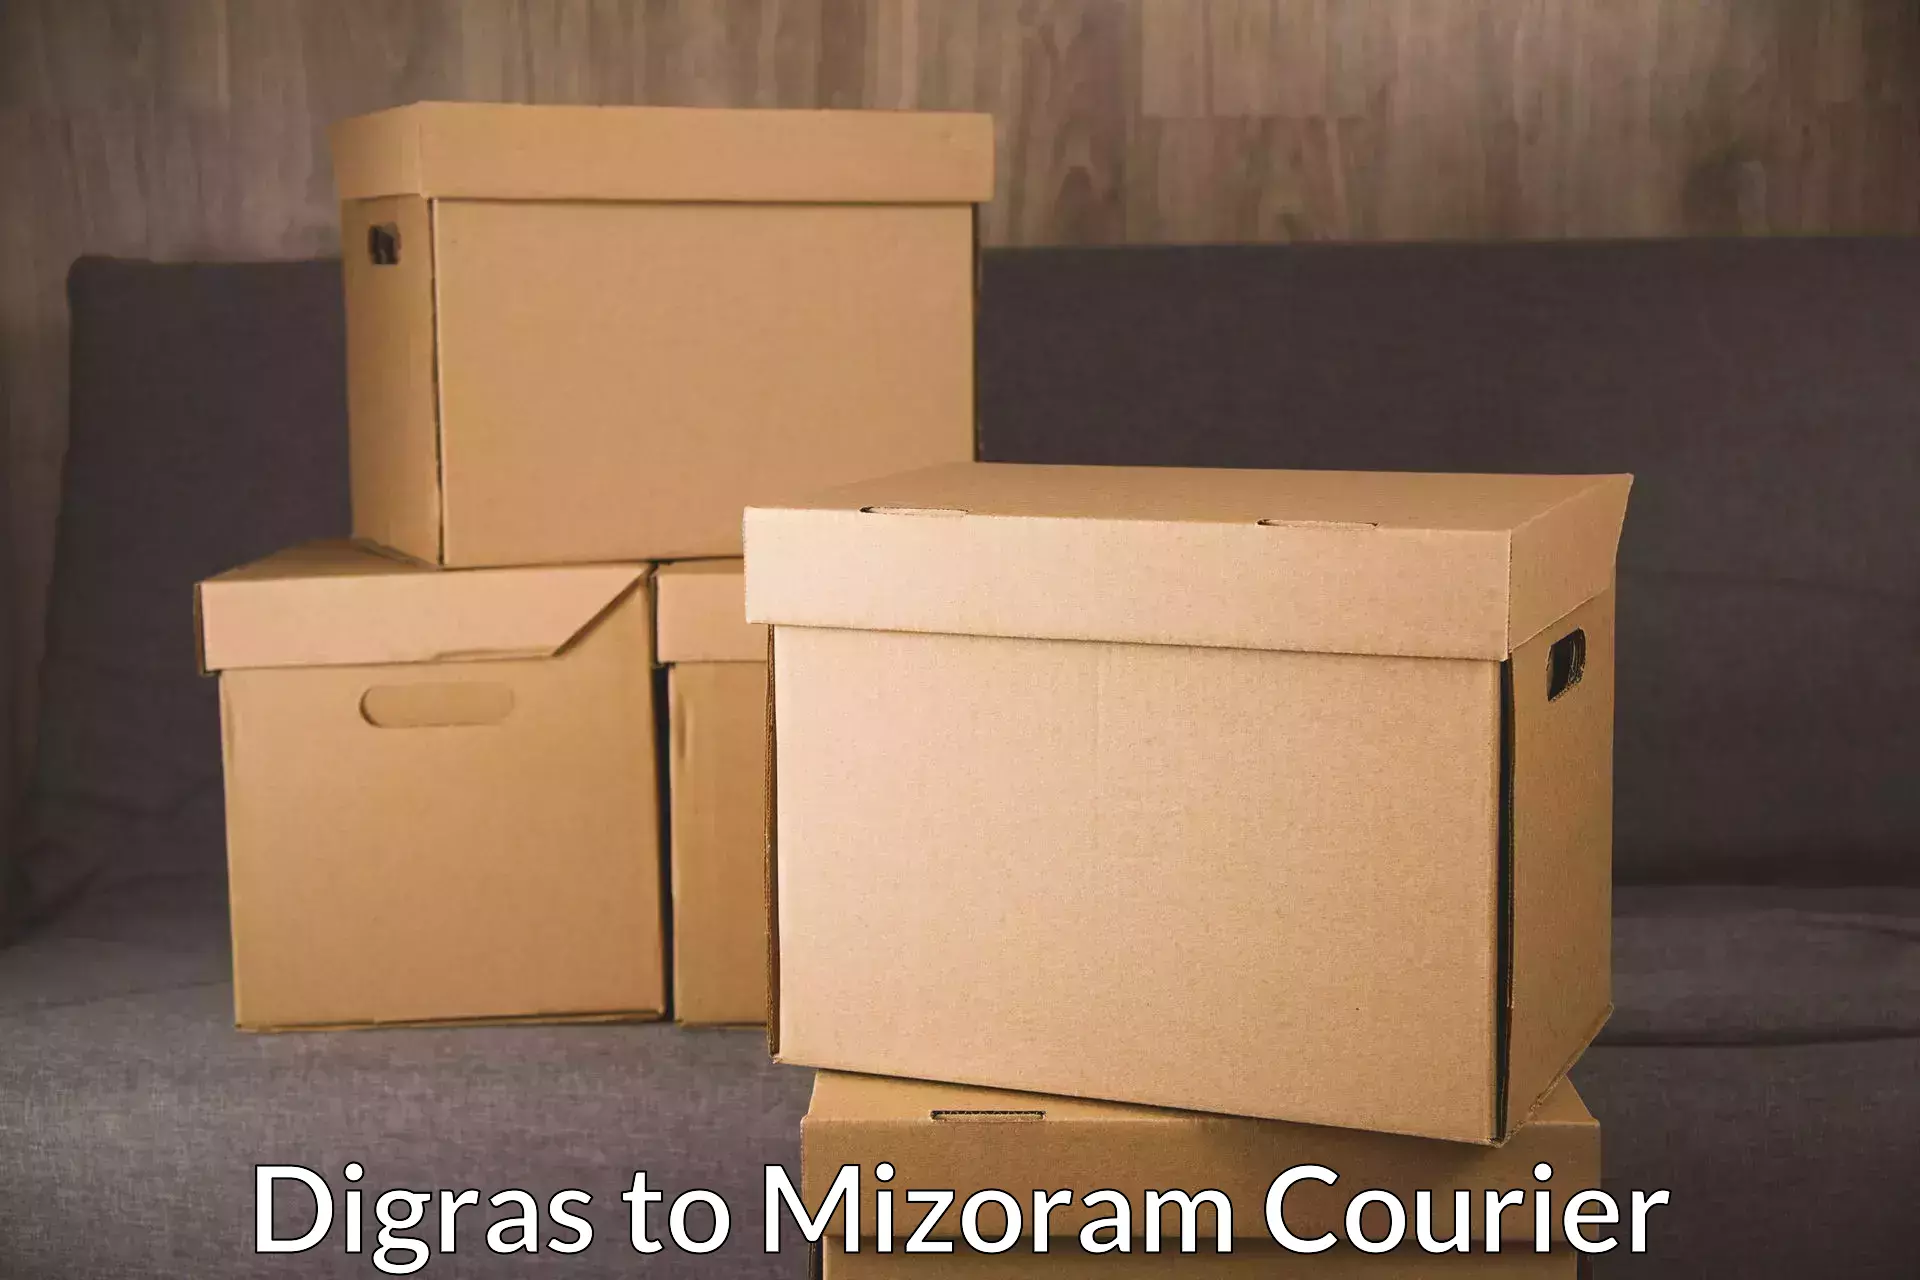 Overnight delivery services Digras to Mizoram